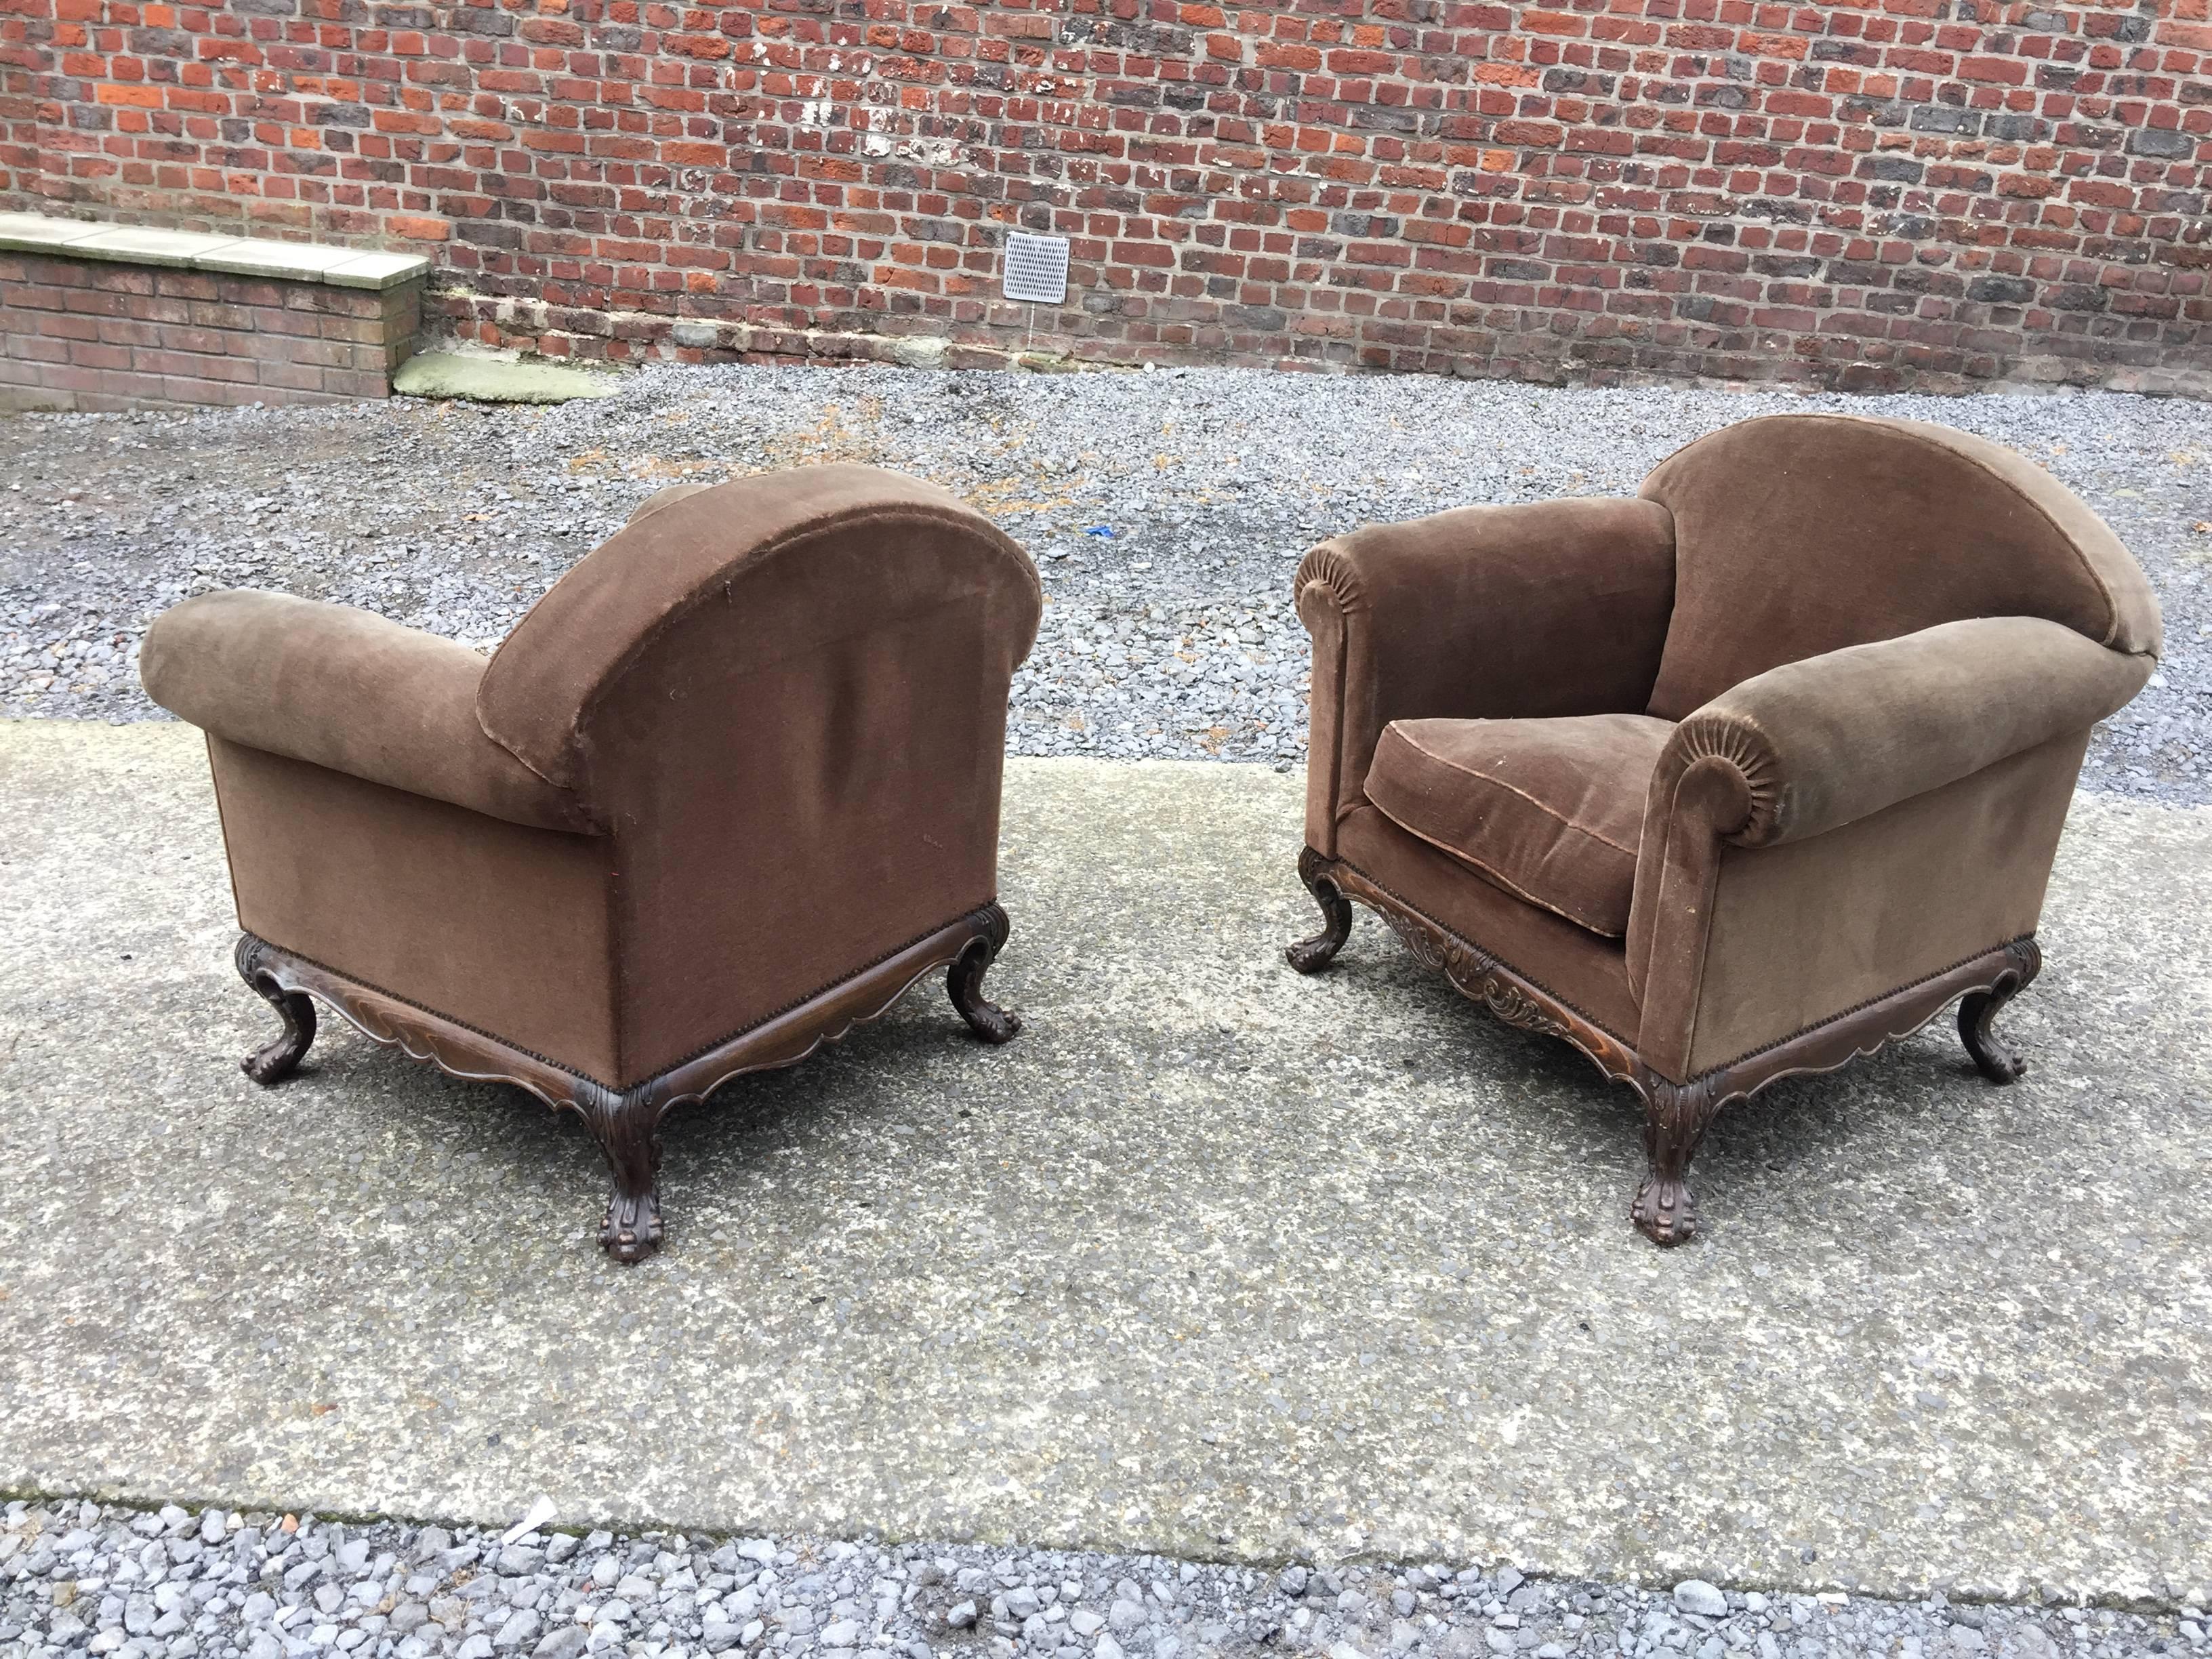 Pair of style Queen Anne armchairs, circa 1930
Fabric used.